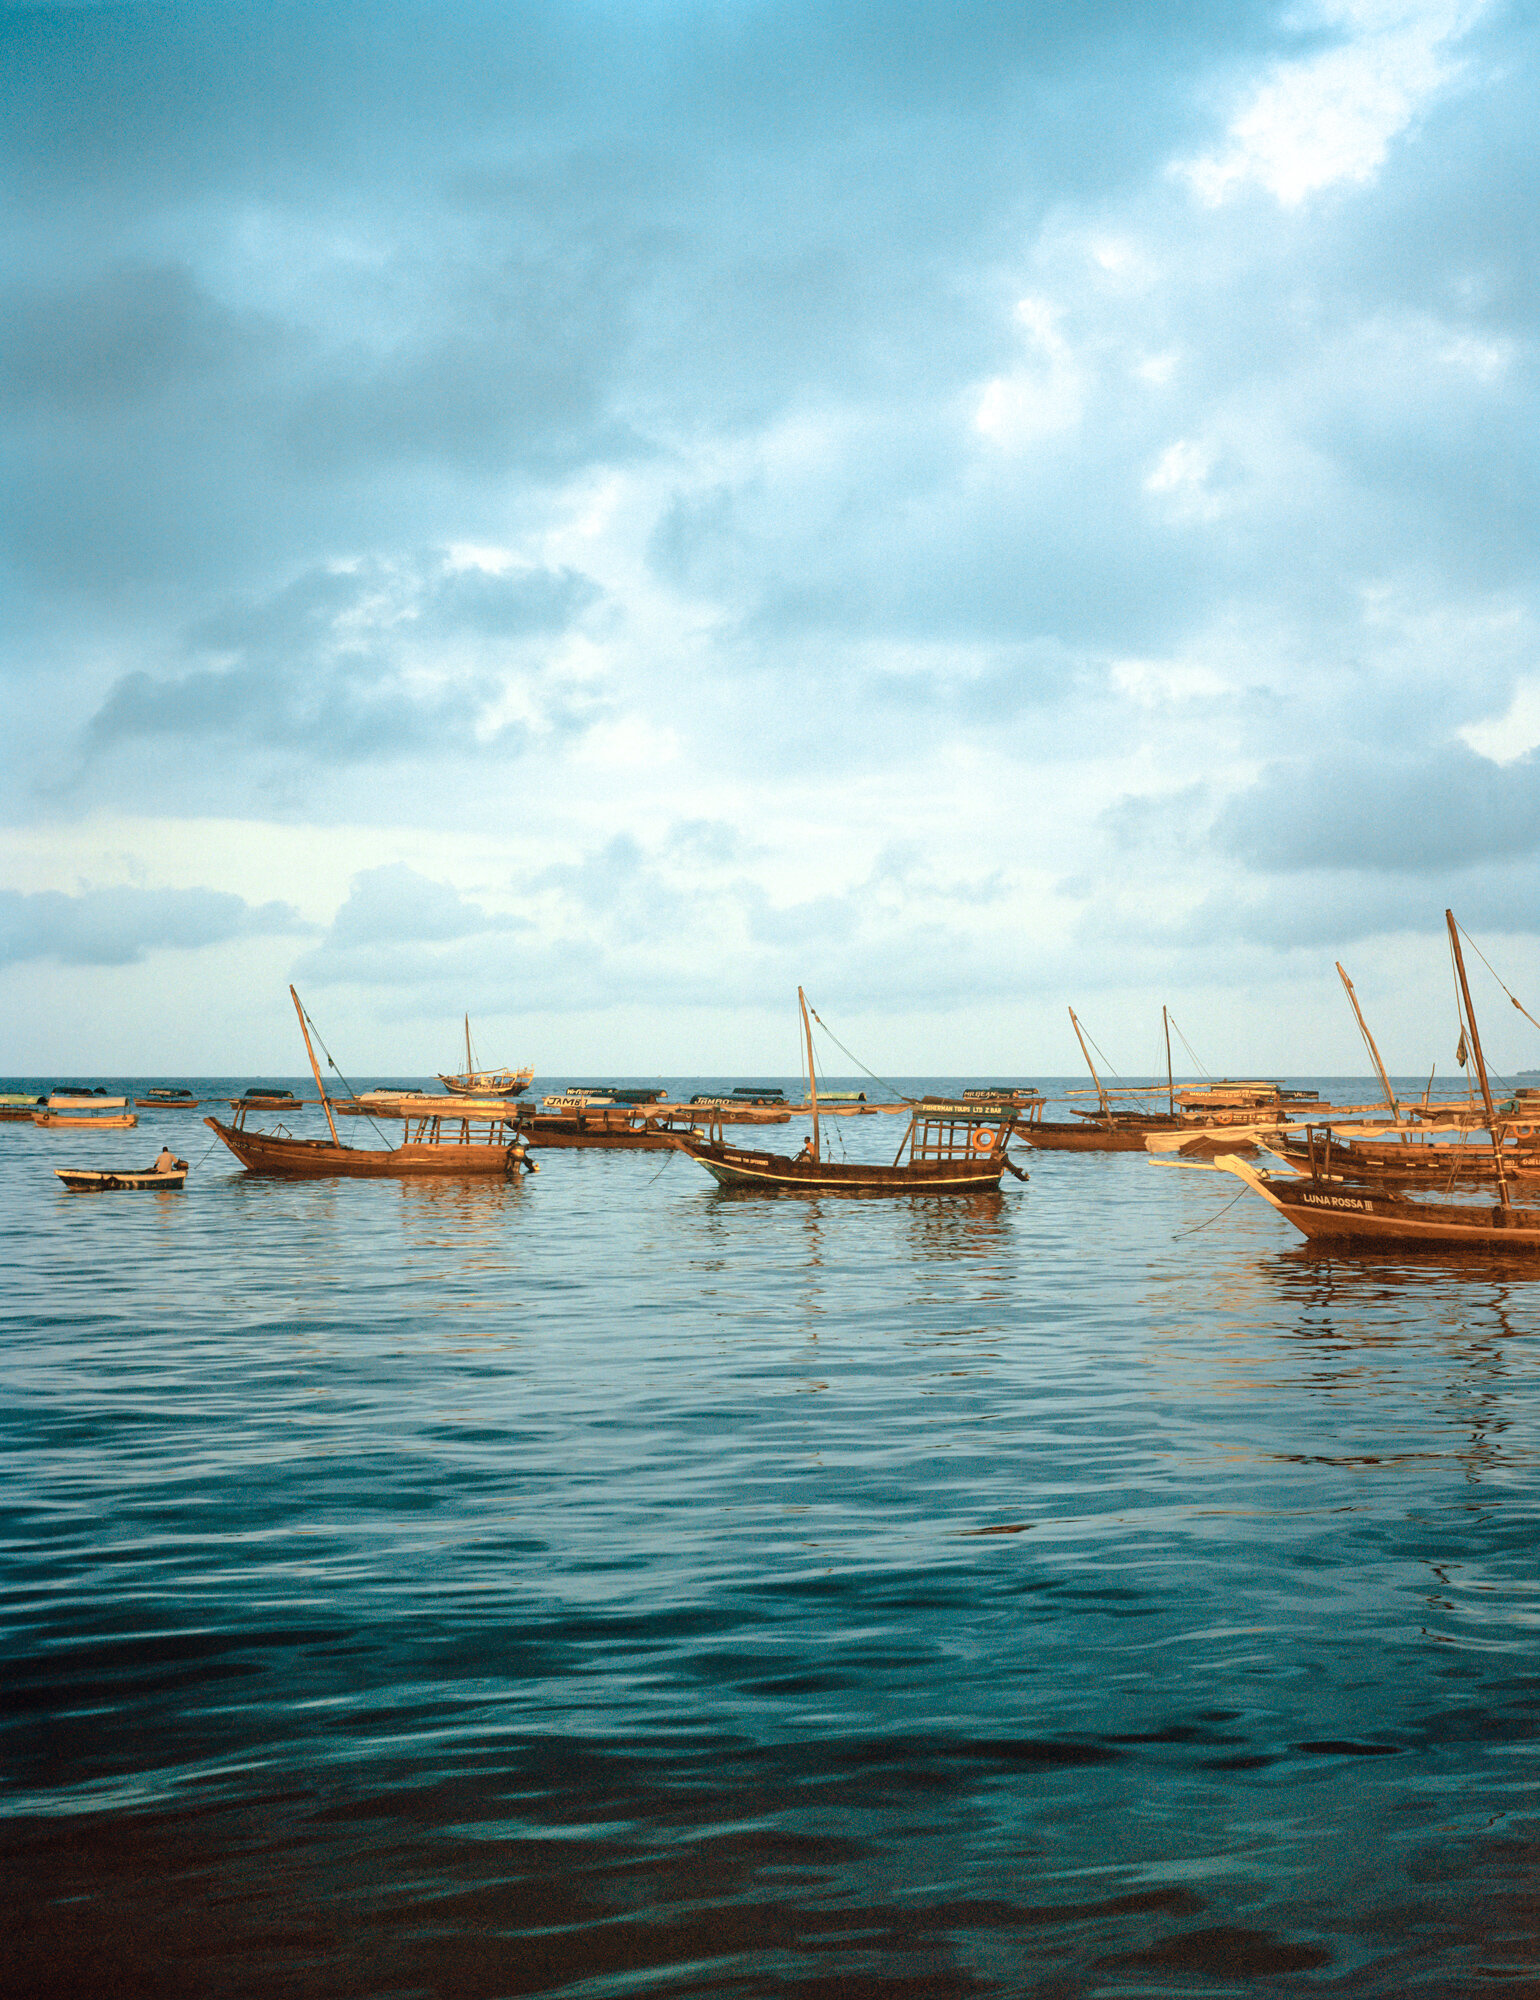  Morning light over traditional Dhow boats, Stone Town, 2019 